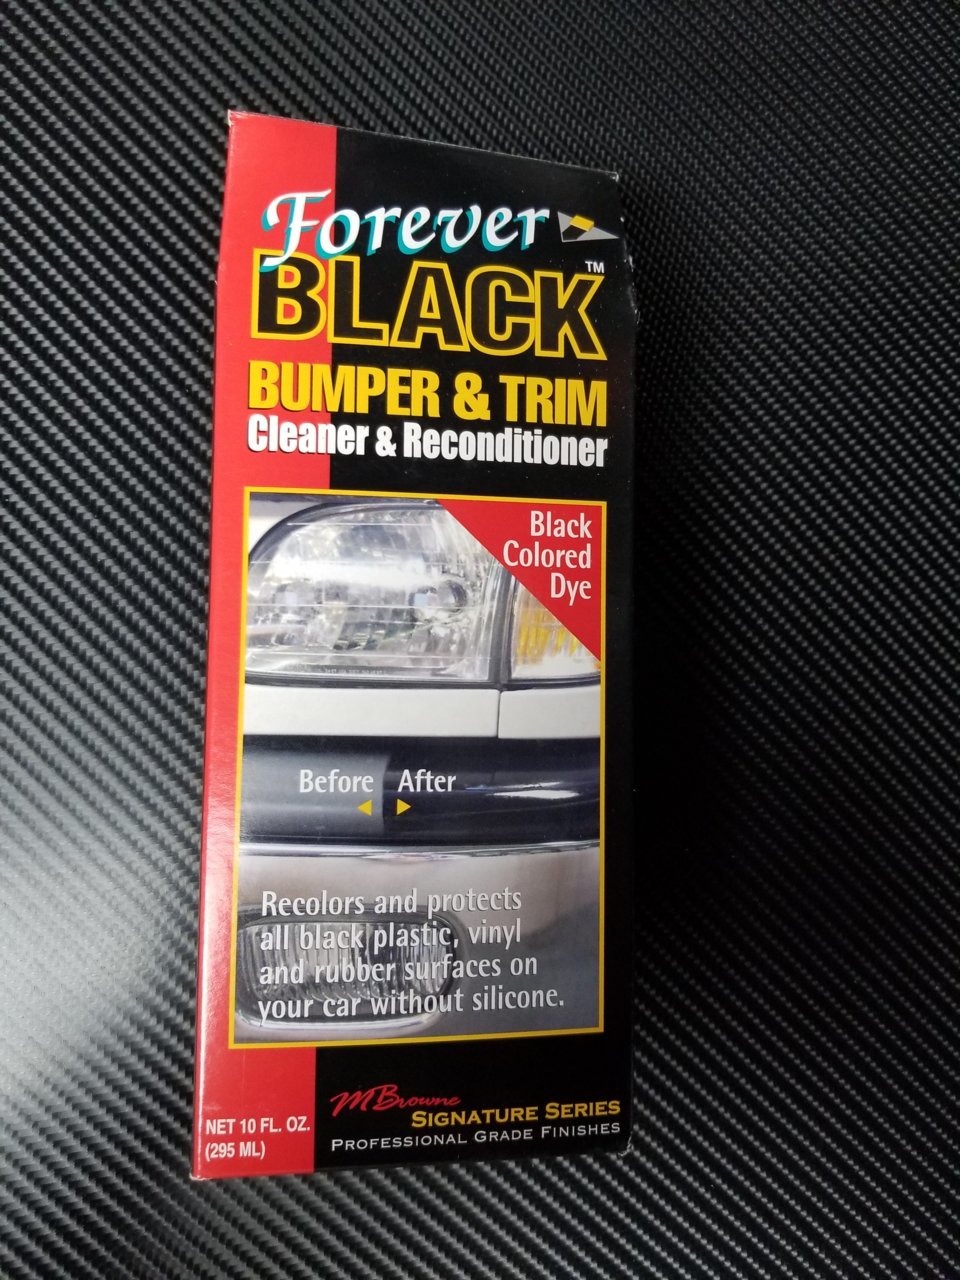 Forever BLACK Bumper & Trim cleaner and reconditioner 